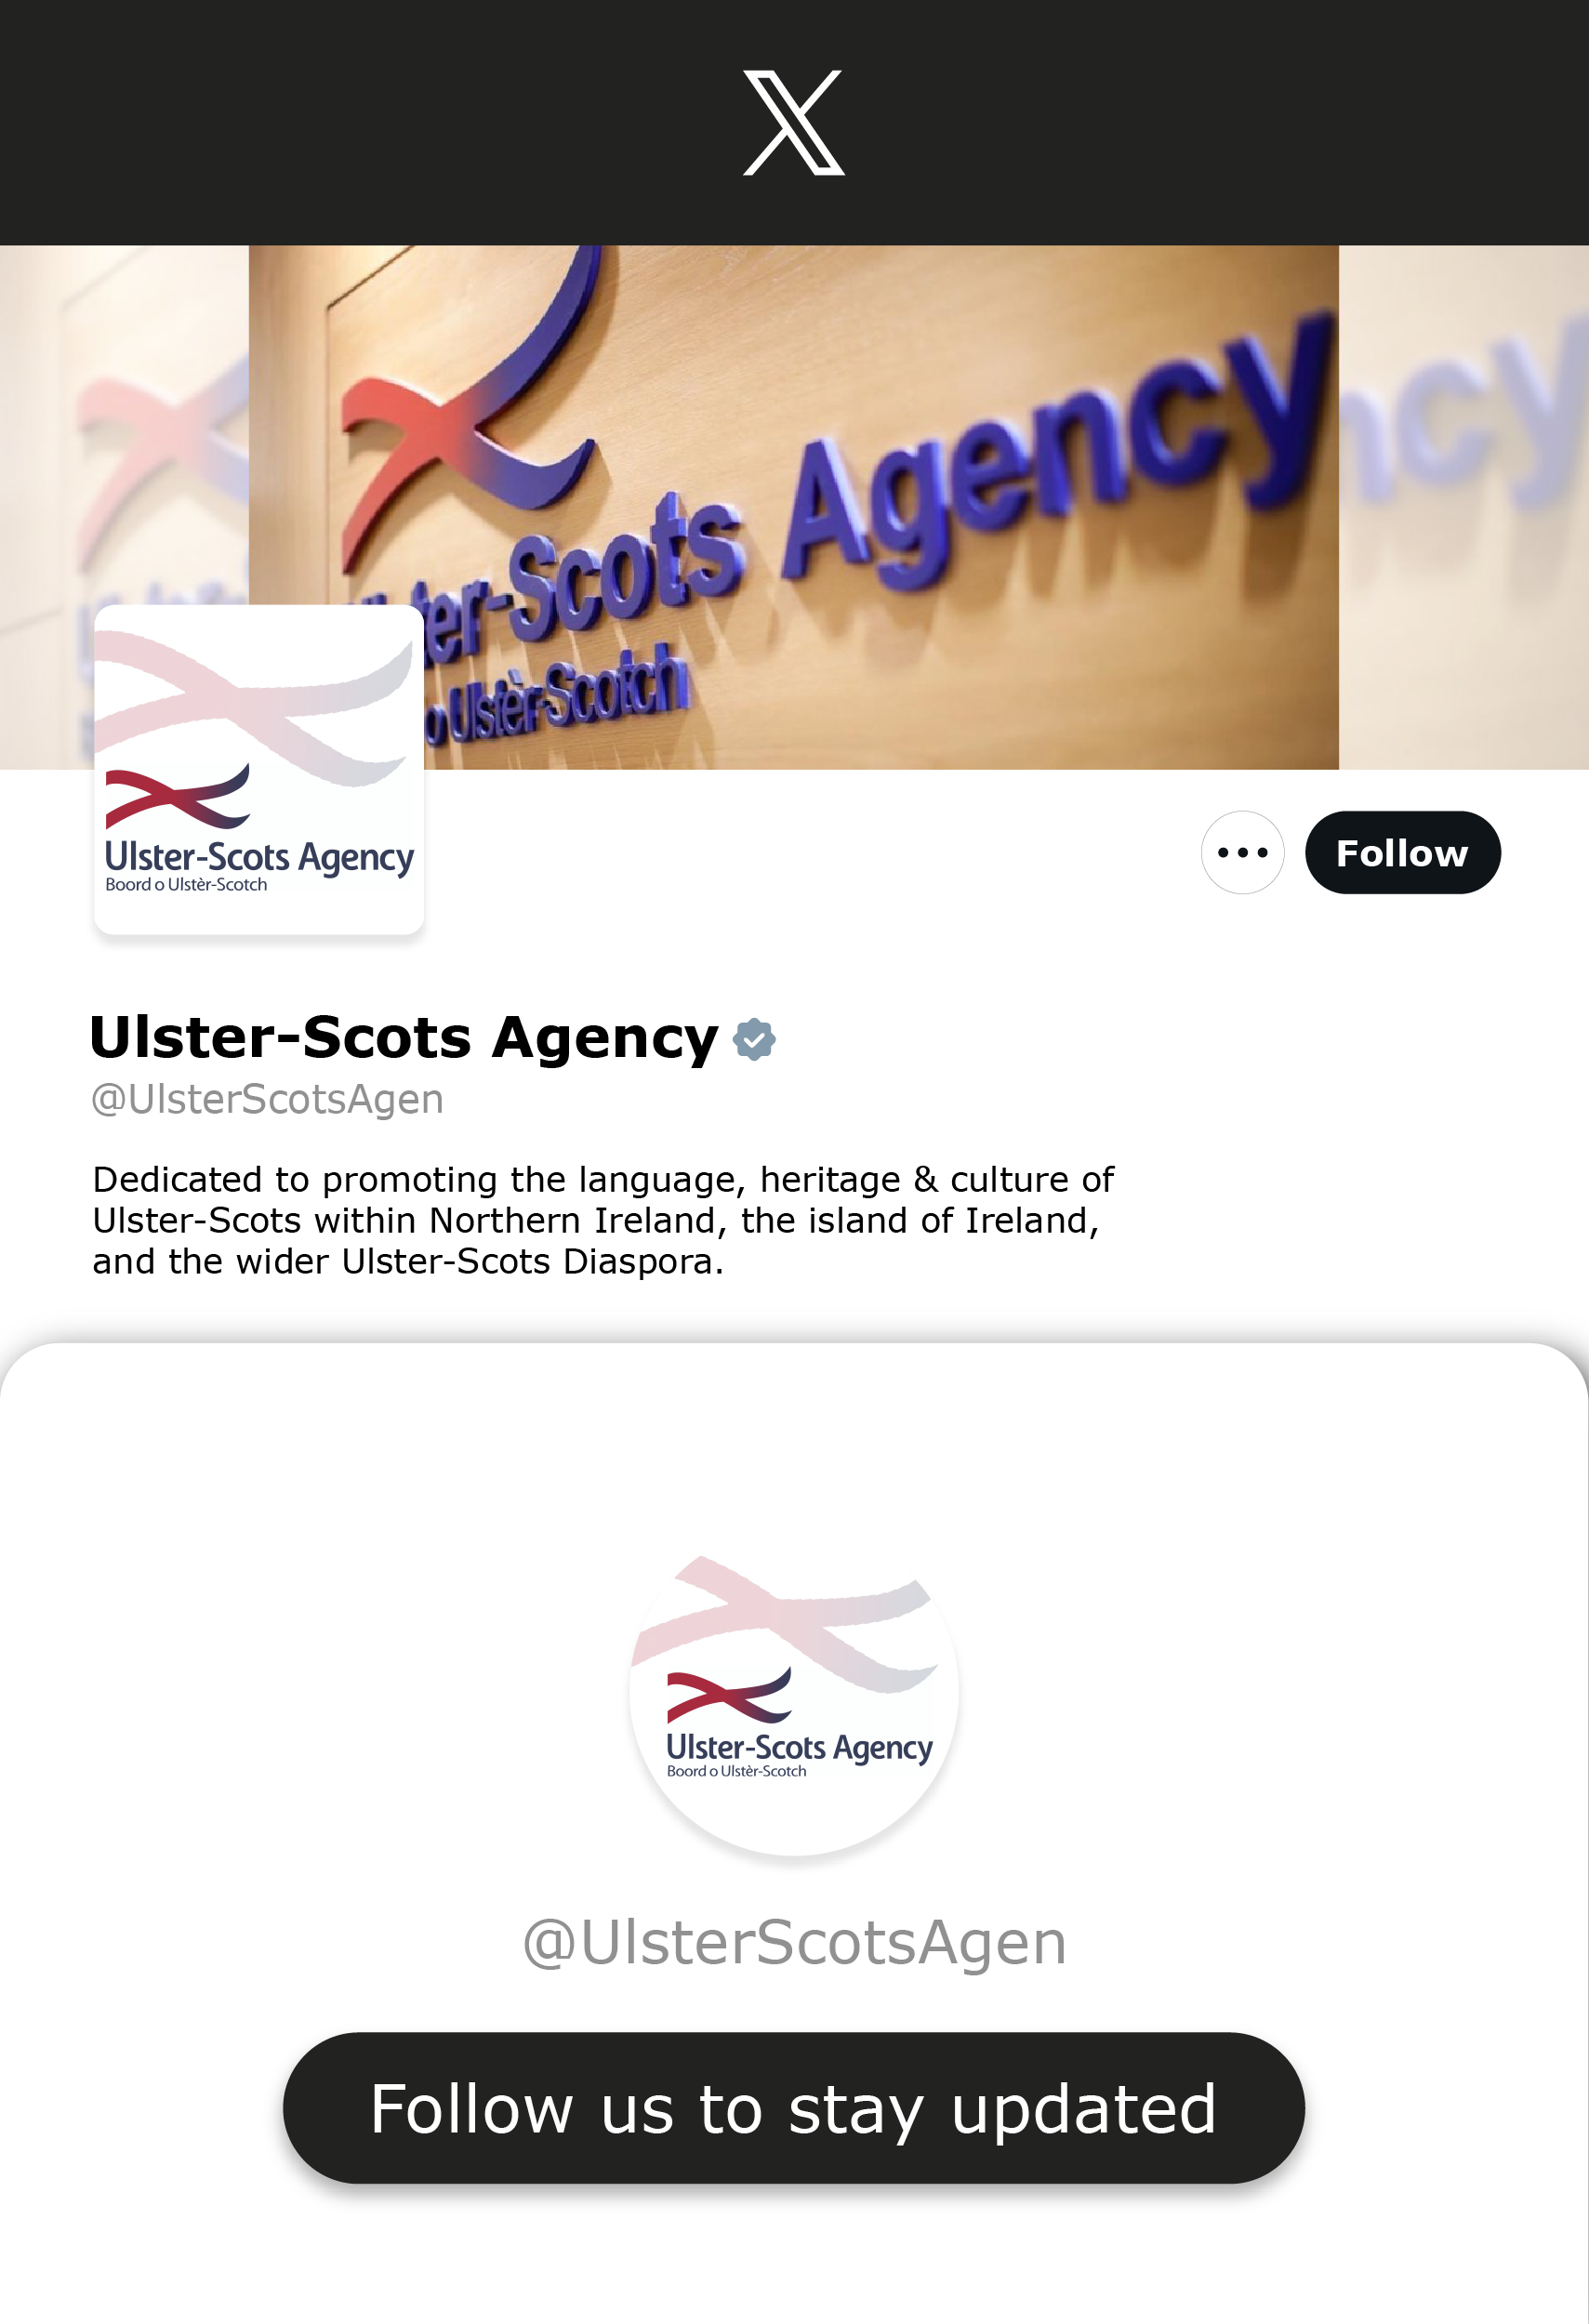 Discover Ulster-Scots on X